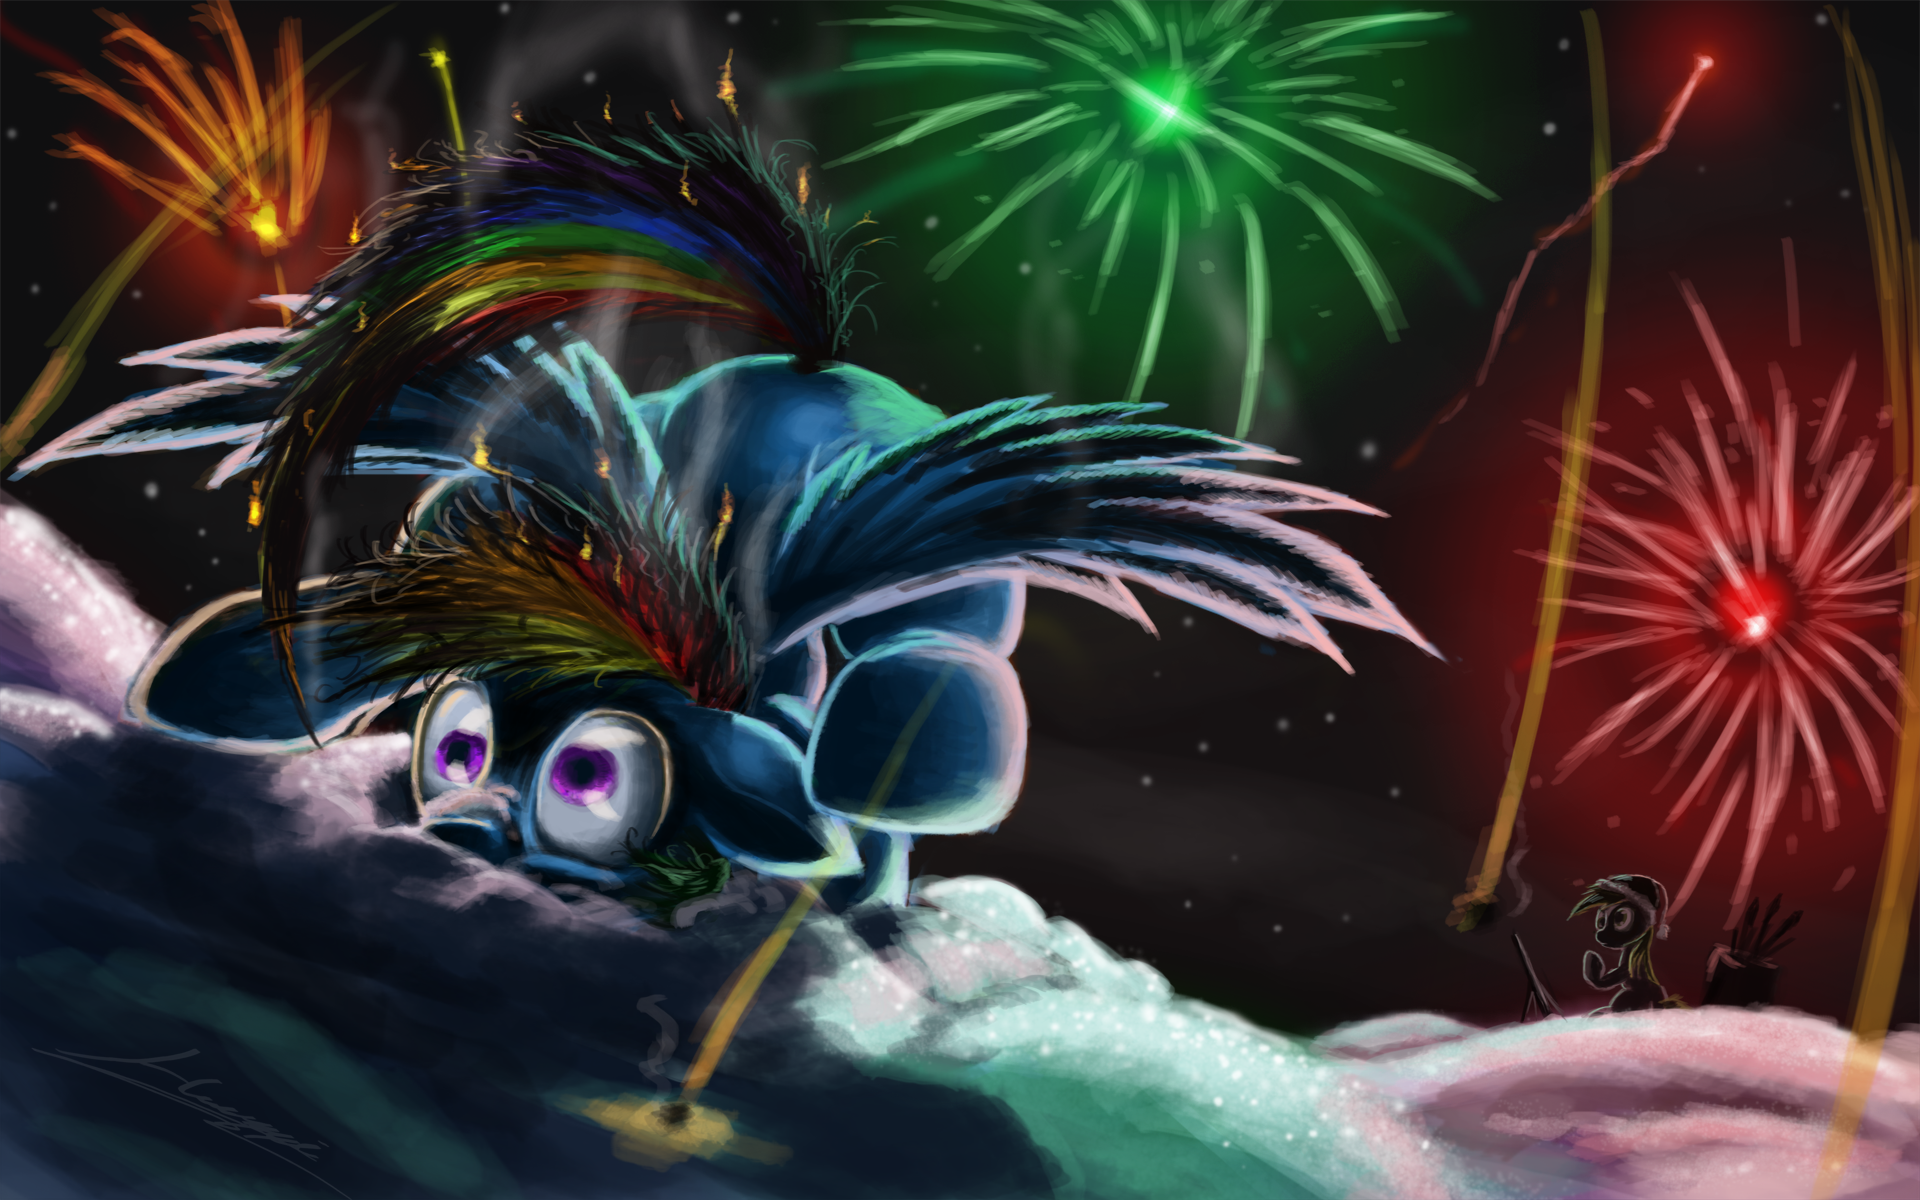 searin___hot_new_year_2012_by_huussii-d4kvp91.png